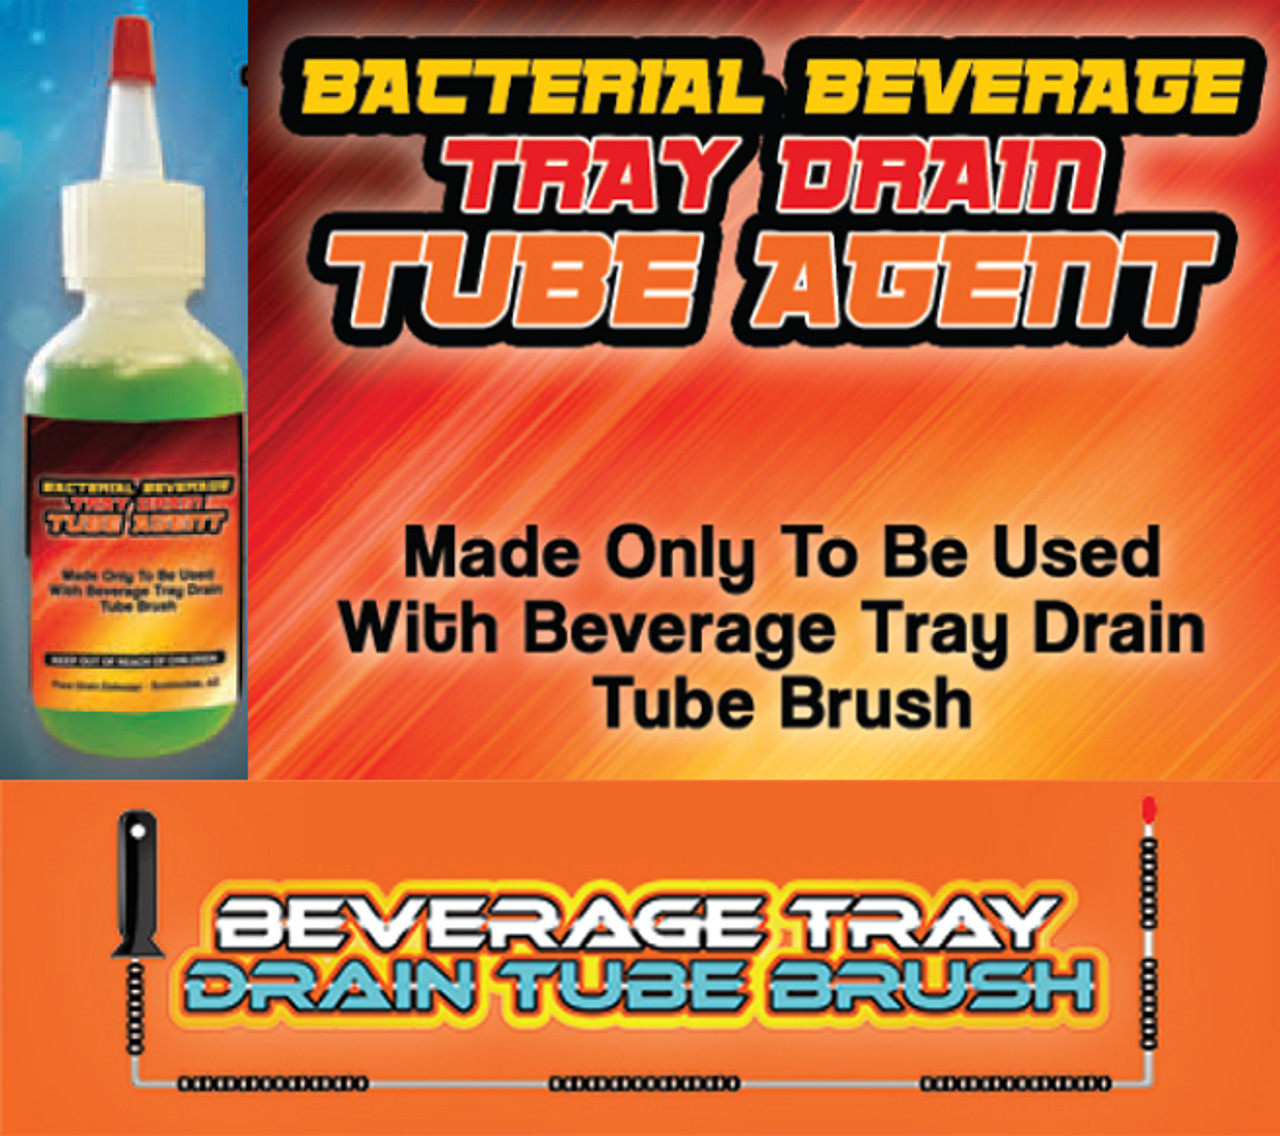 Bacterial Beverage Tray Drain Tube Agent - Eliminate the sugar snake!